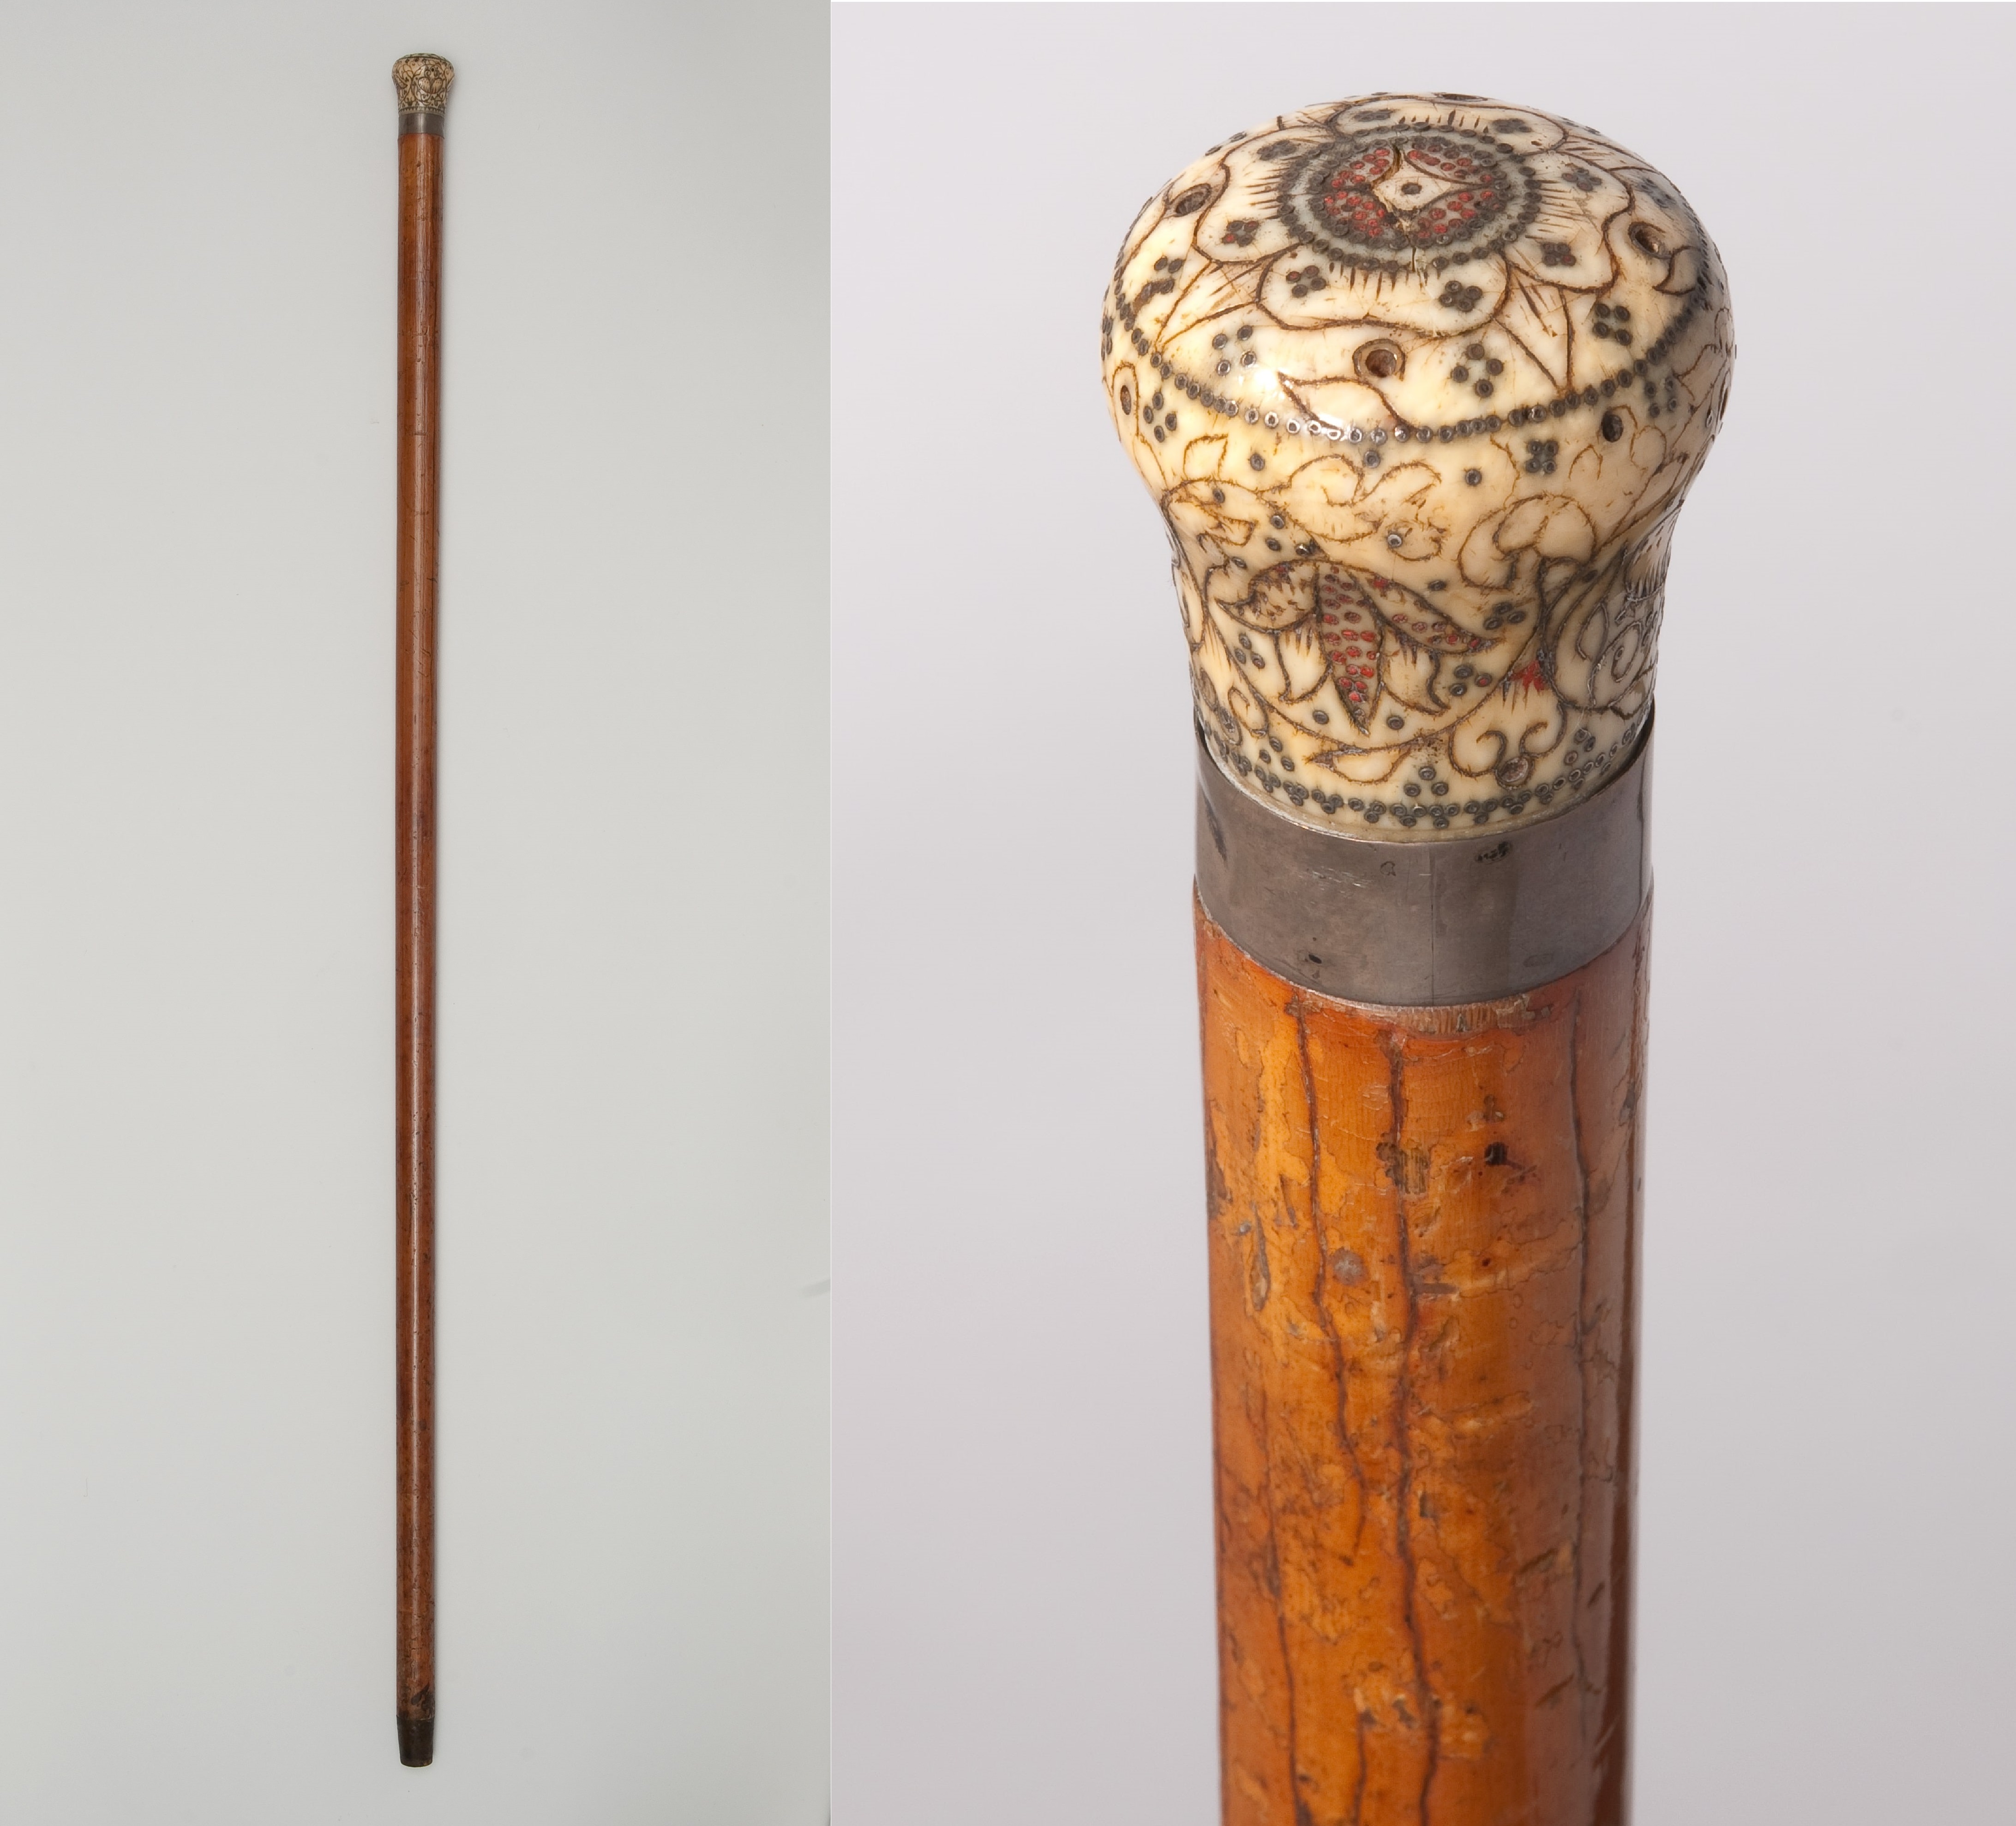 Two images of a walking one, left showing the full length of the cane, right showing detail of the ivory top, which has floral engravings in